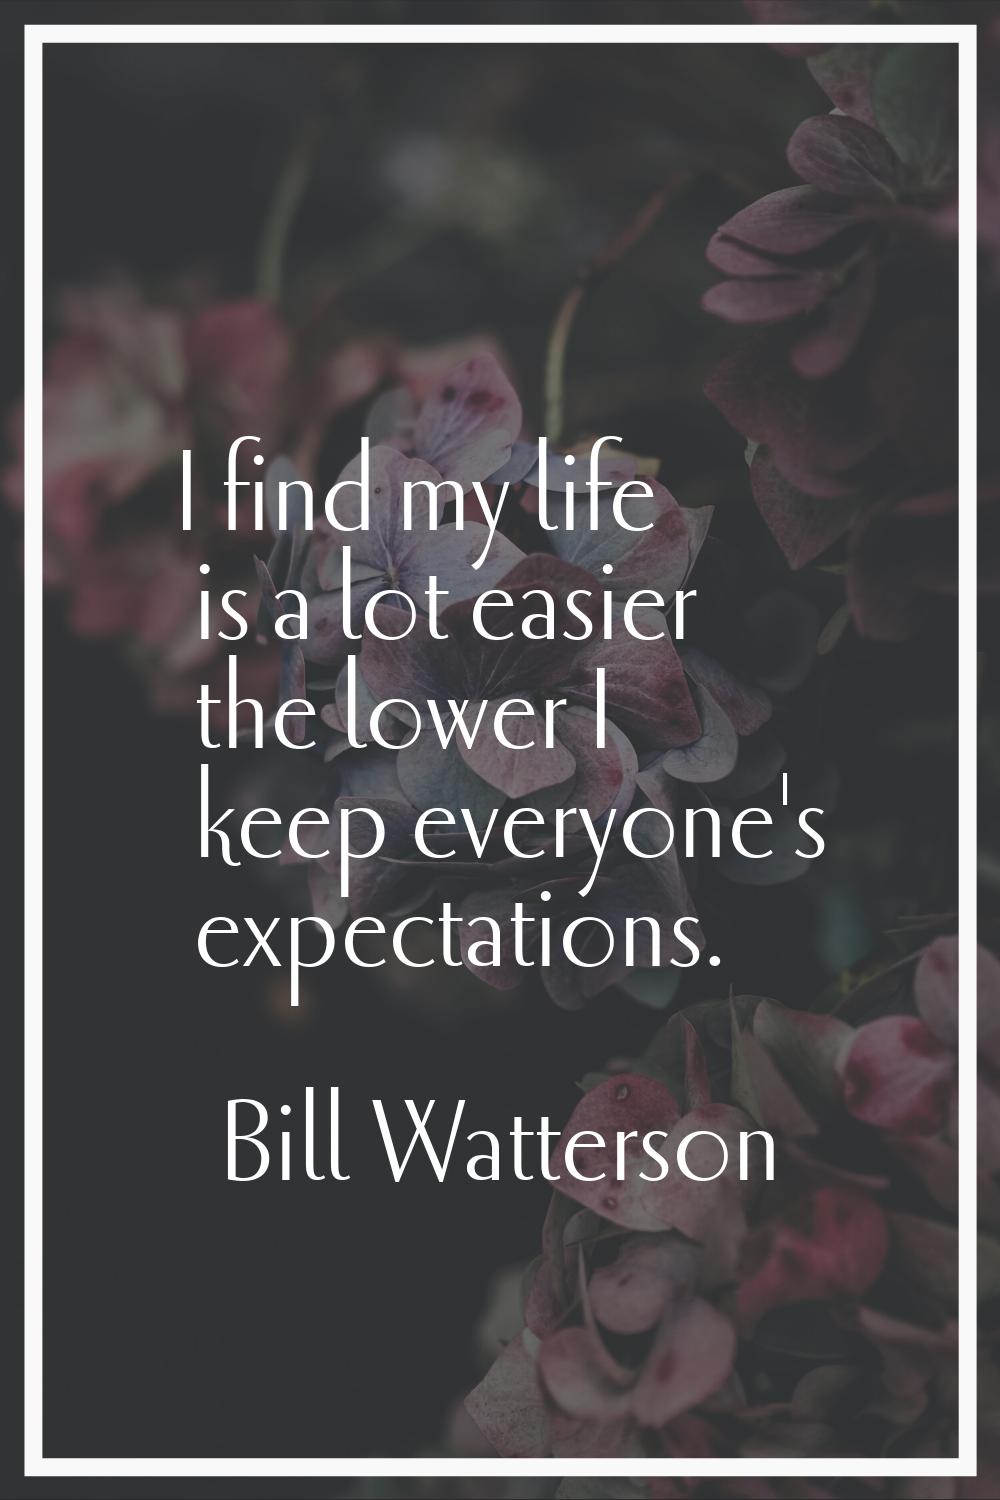 I find my life is a lot easier the lower I keep everyone's expectations.